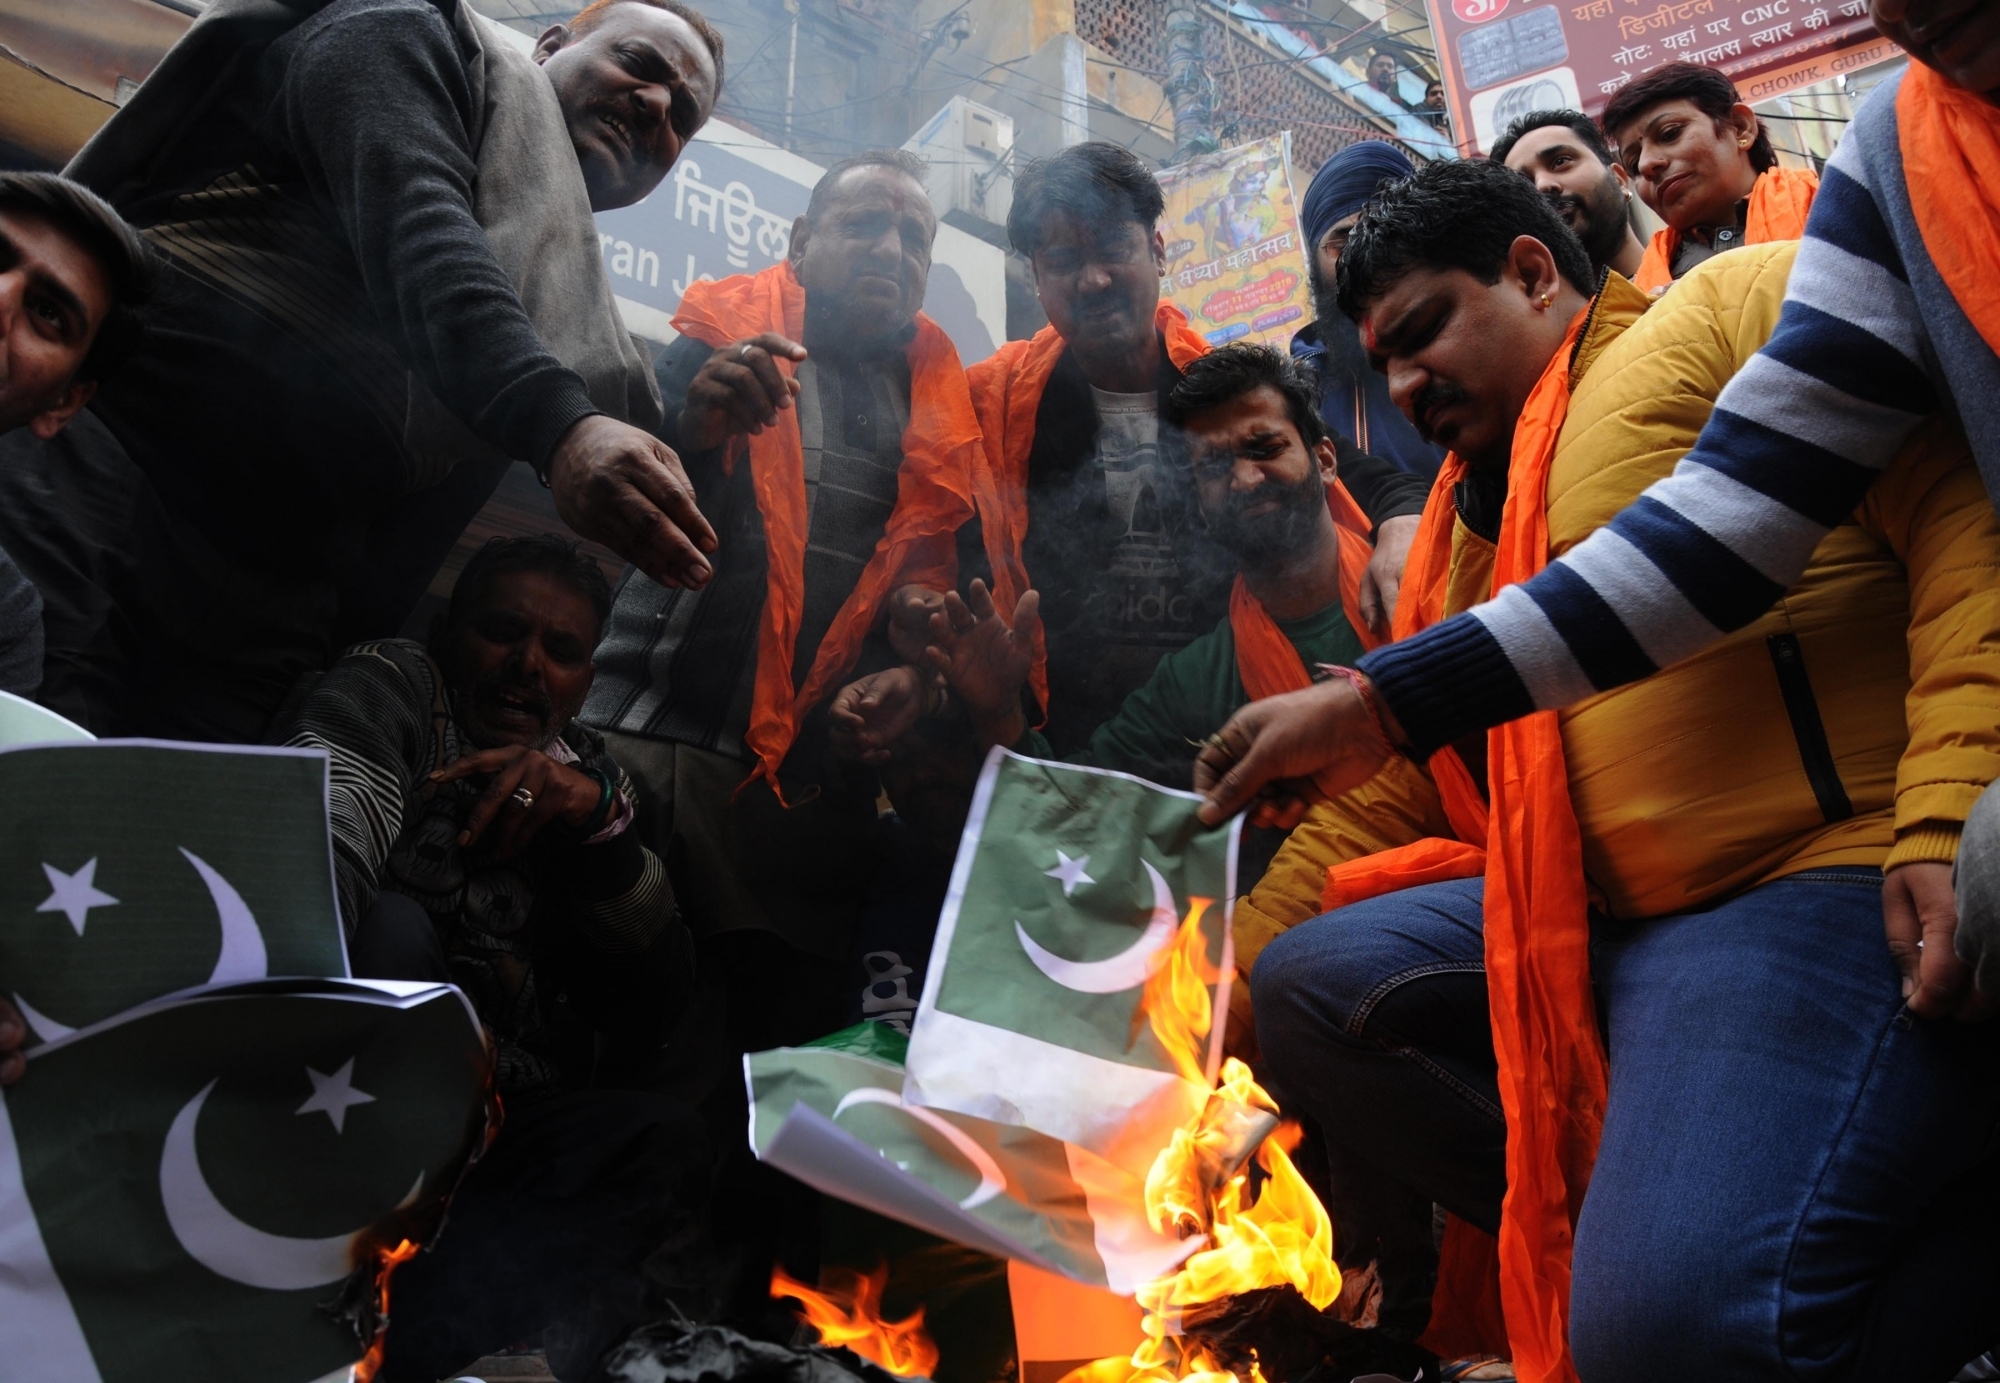 Kashmir Chamber of Commerce asks to maintain communal harmony amid Pulwama attack